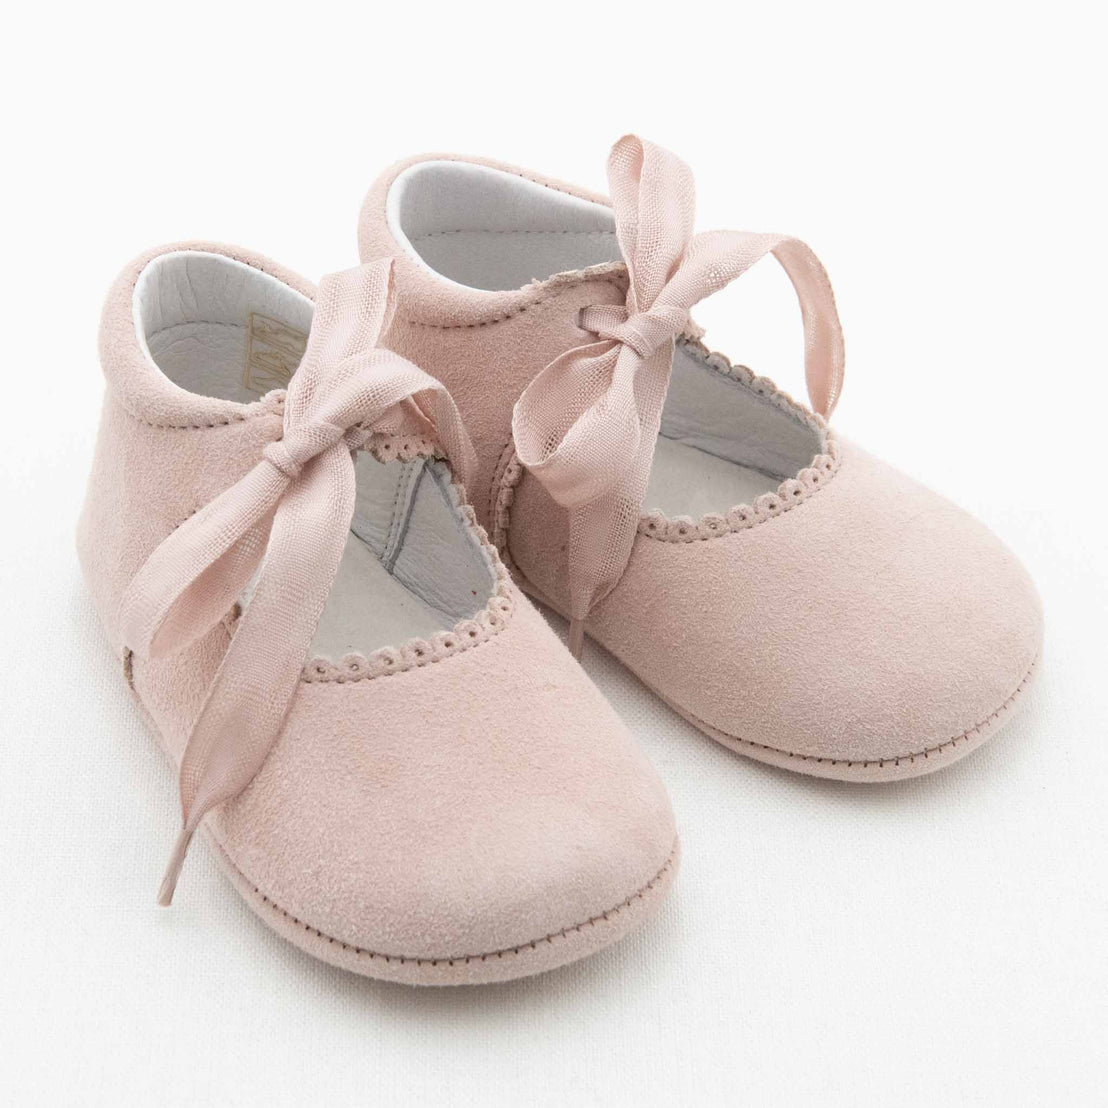 A pair of June Suede Tie Mary Janes from Baby Beau & Belle is seen. Crafted from blush suede, each shoe features a delicate satin bow tied at the front, scalloped edges around the opening, and a rounded toe design. The interior lining appears soft and comfortable, perfect for an infant.